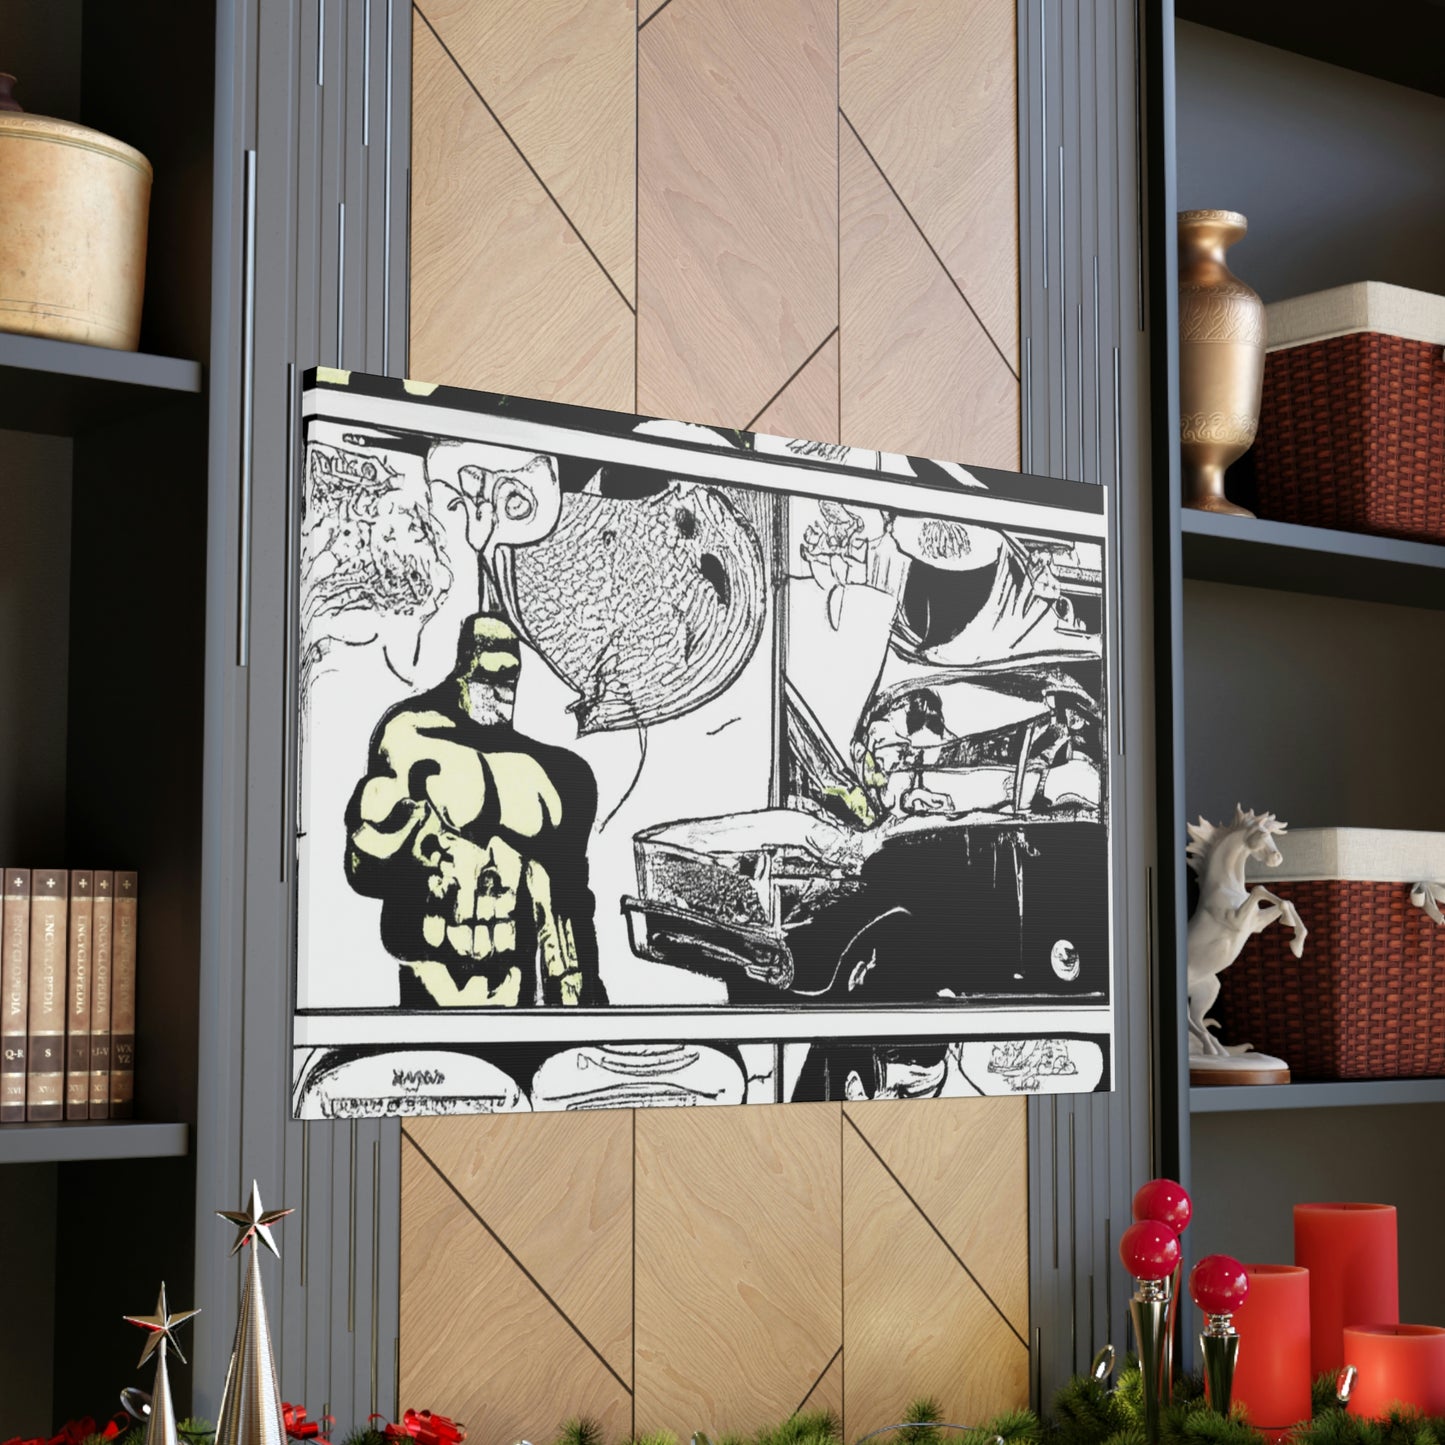 Captain Pyroblast. - Comics Collector Canvas Wall Art For Bedroom Office Living Room